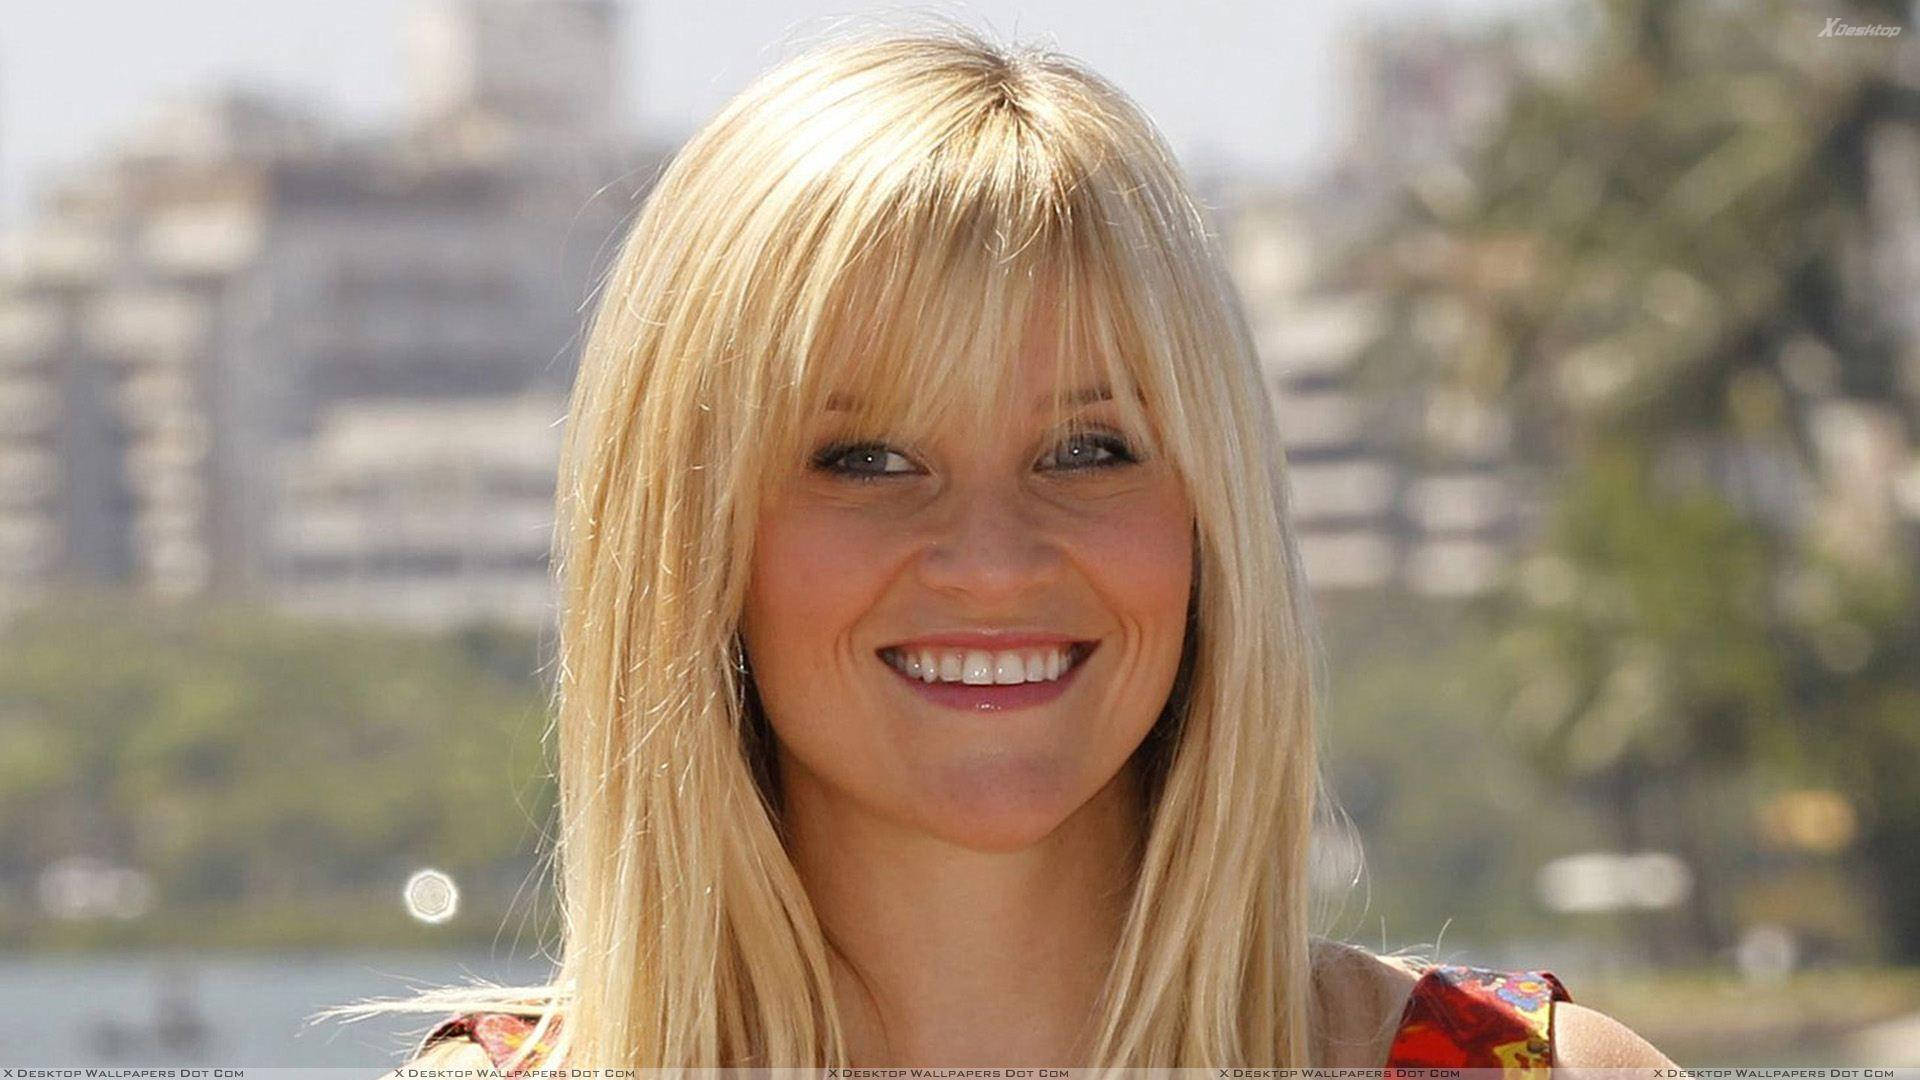 Young Actress Reese Witherspoon Background